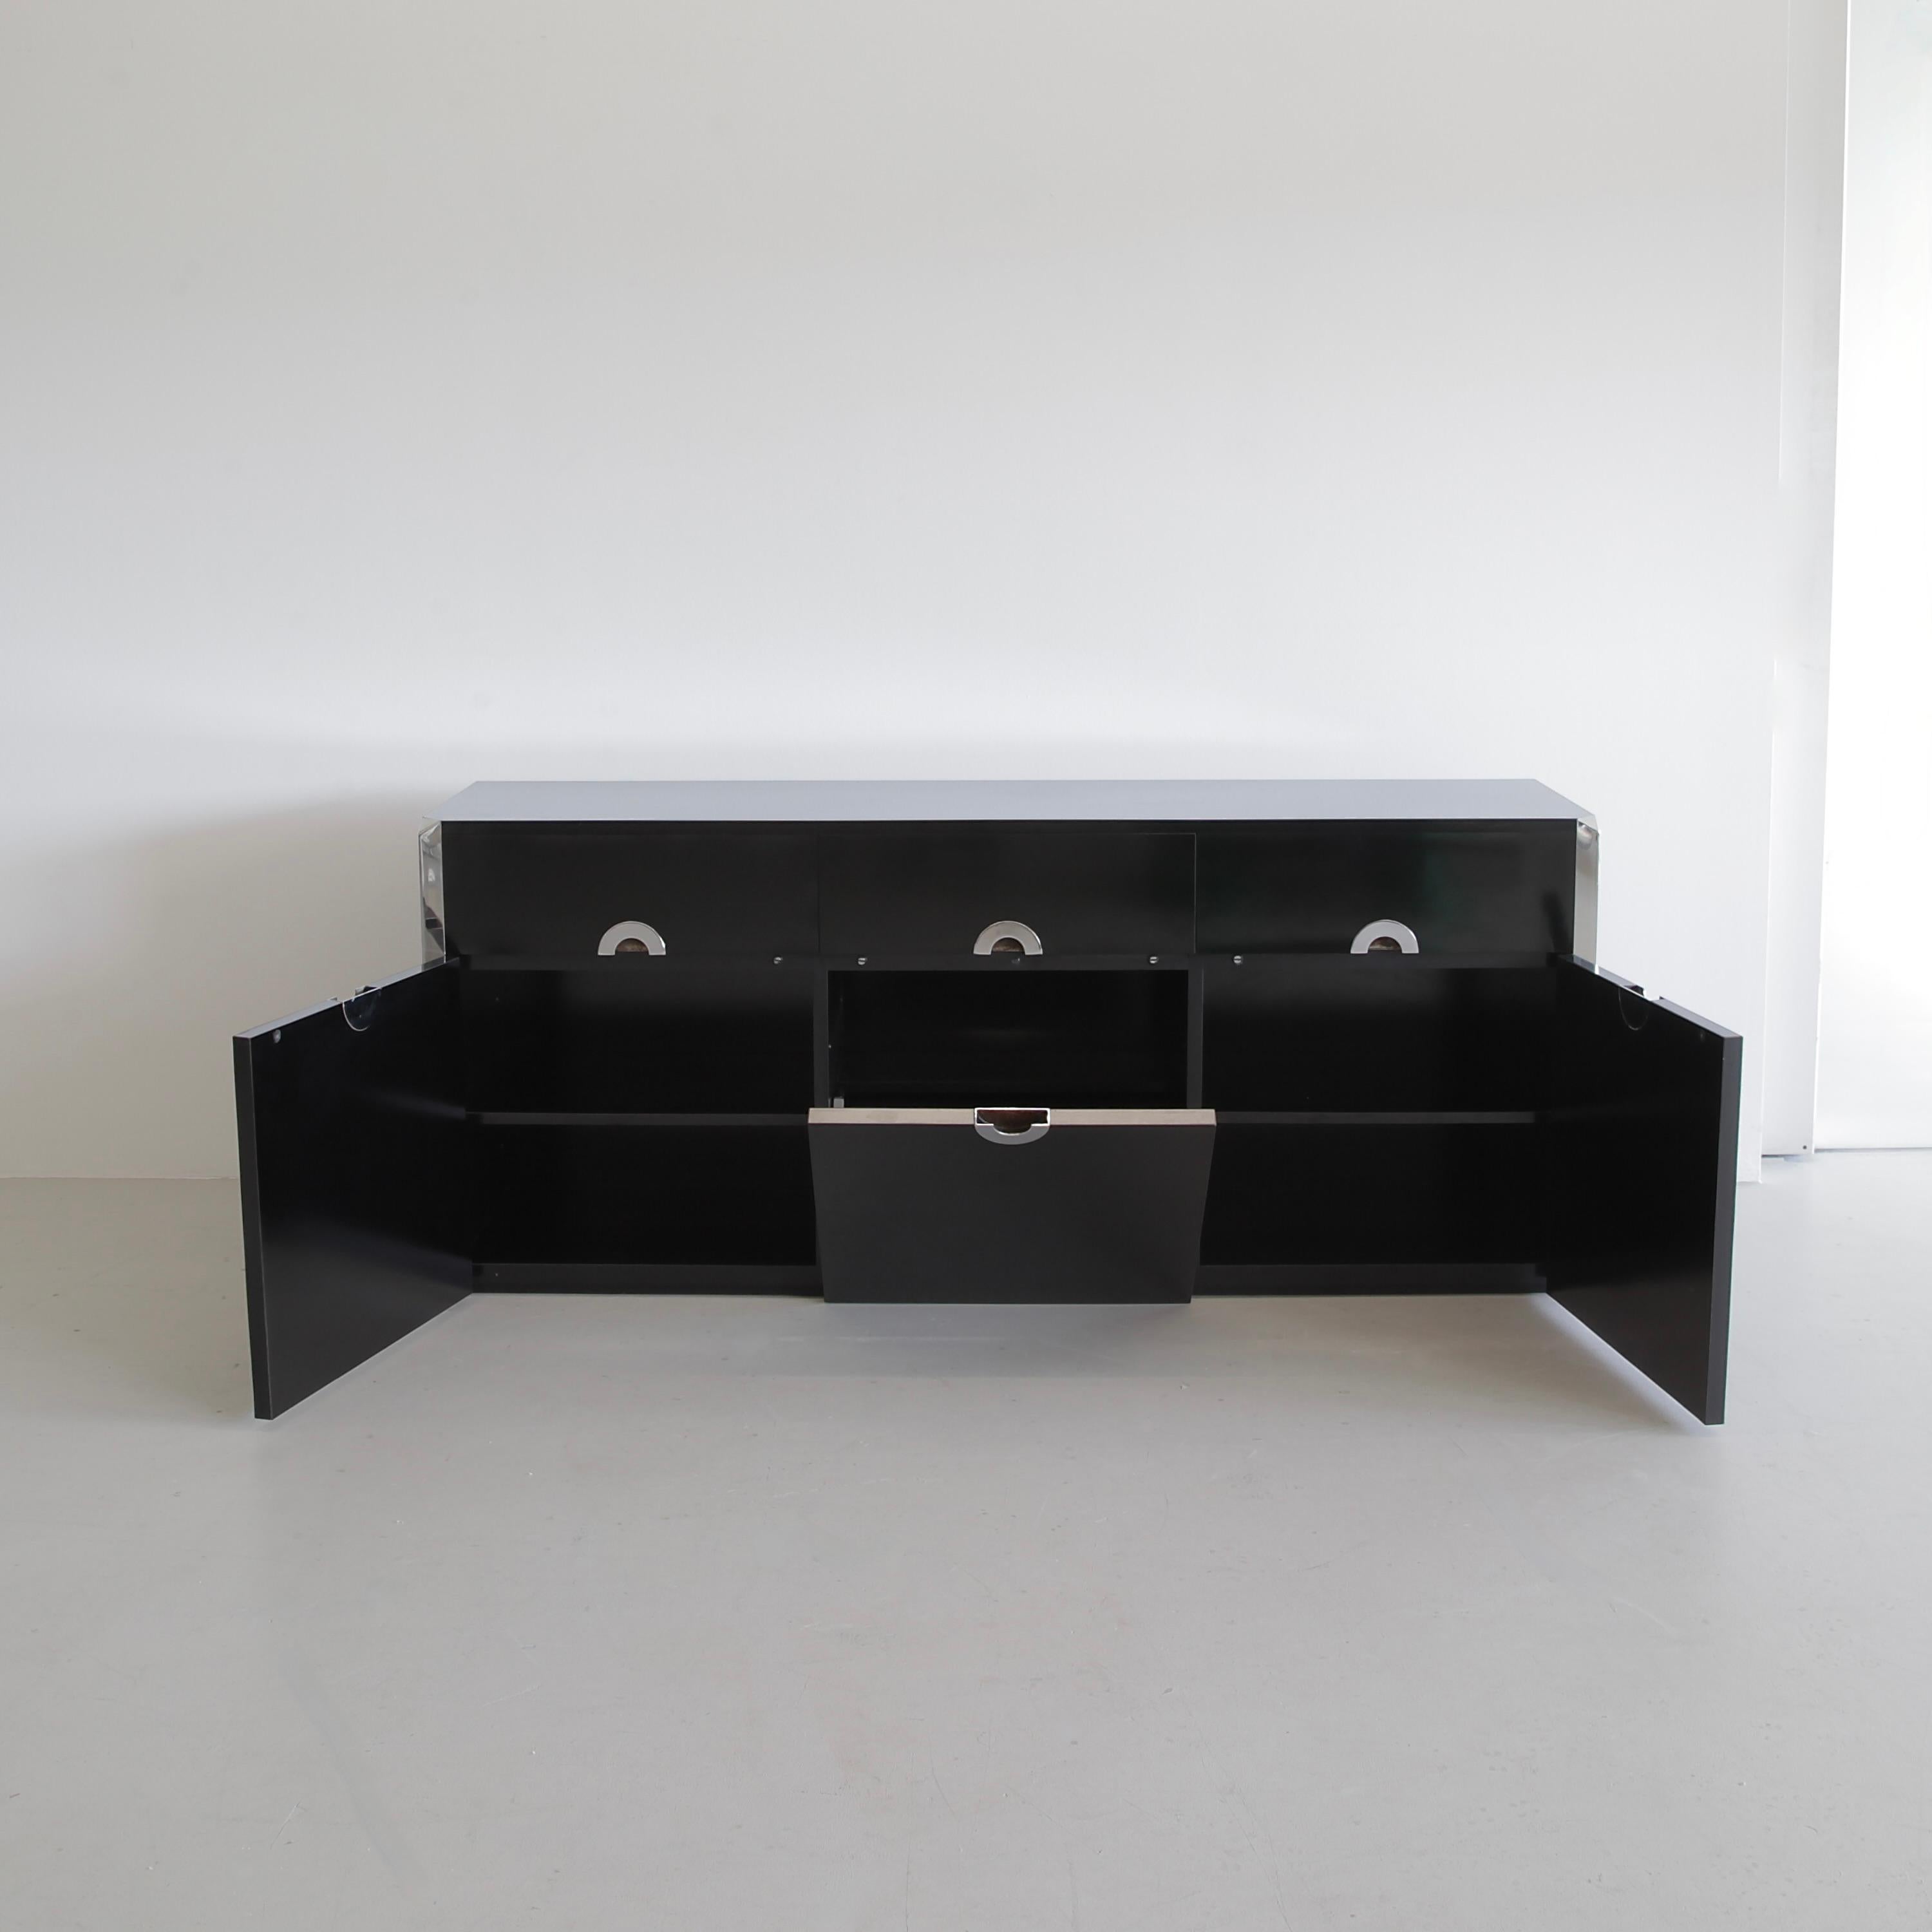 Original black 3-door Sideboard by Willy RIZZO, Sabot 1972 In Fair Condition For Sale In Berlin, Berlin